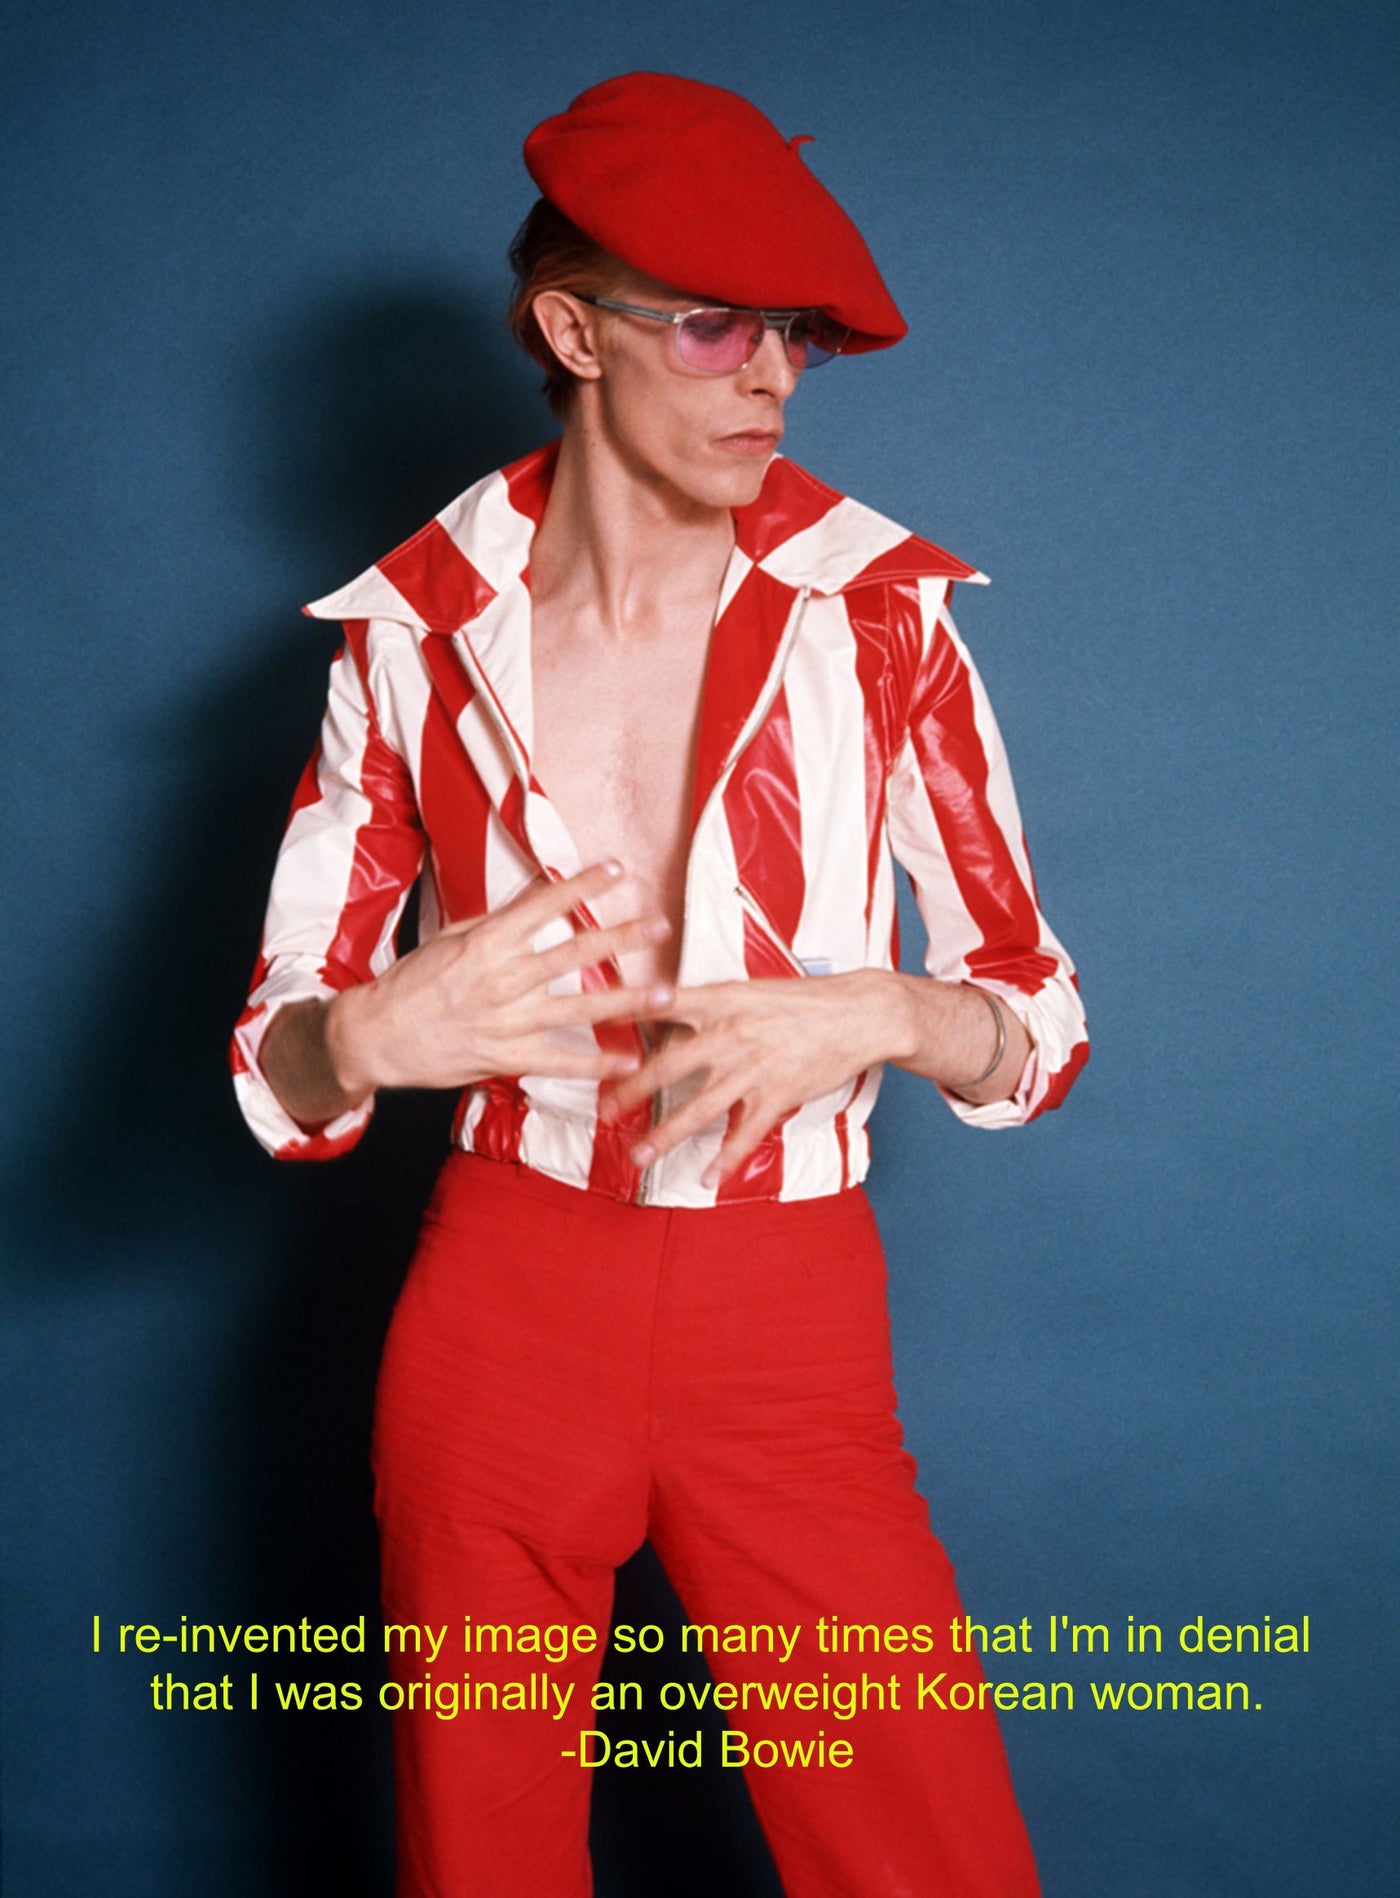 BOWIE QUOTES "I re-invented my image so many times that..."